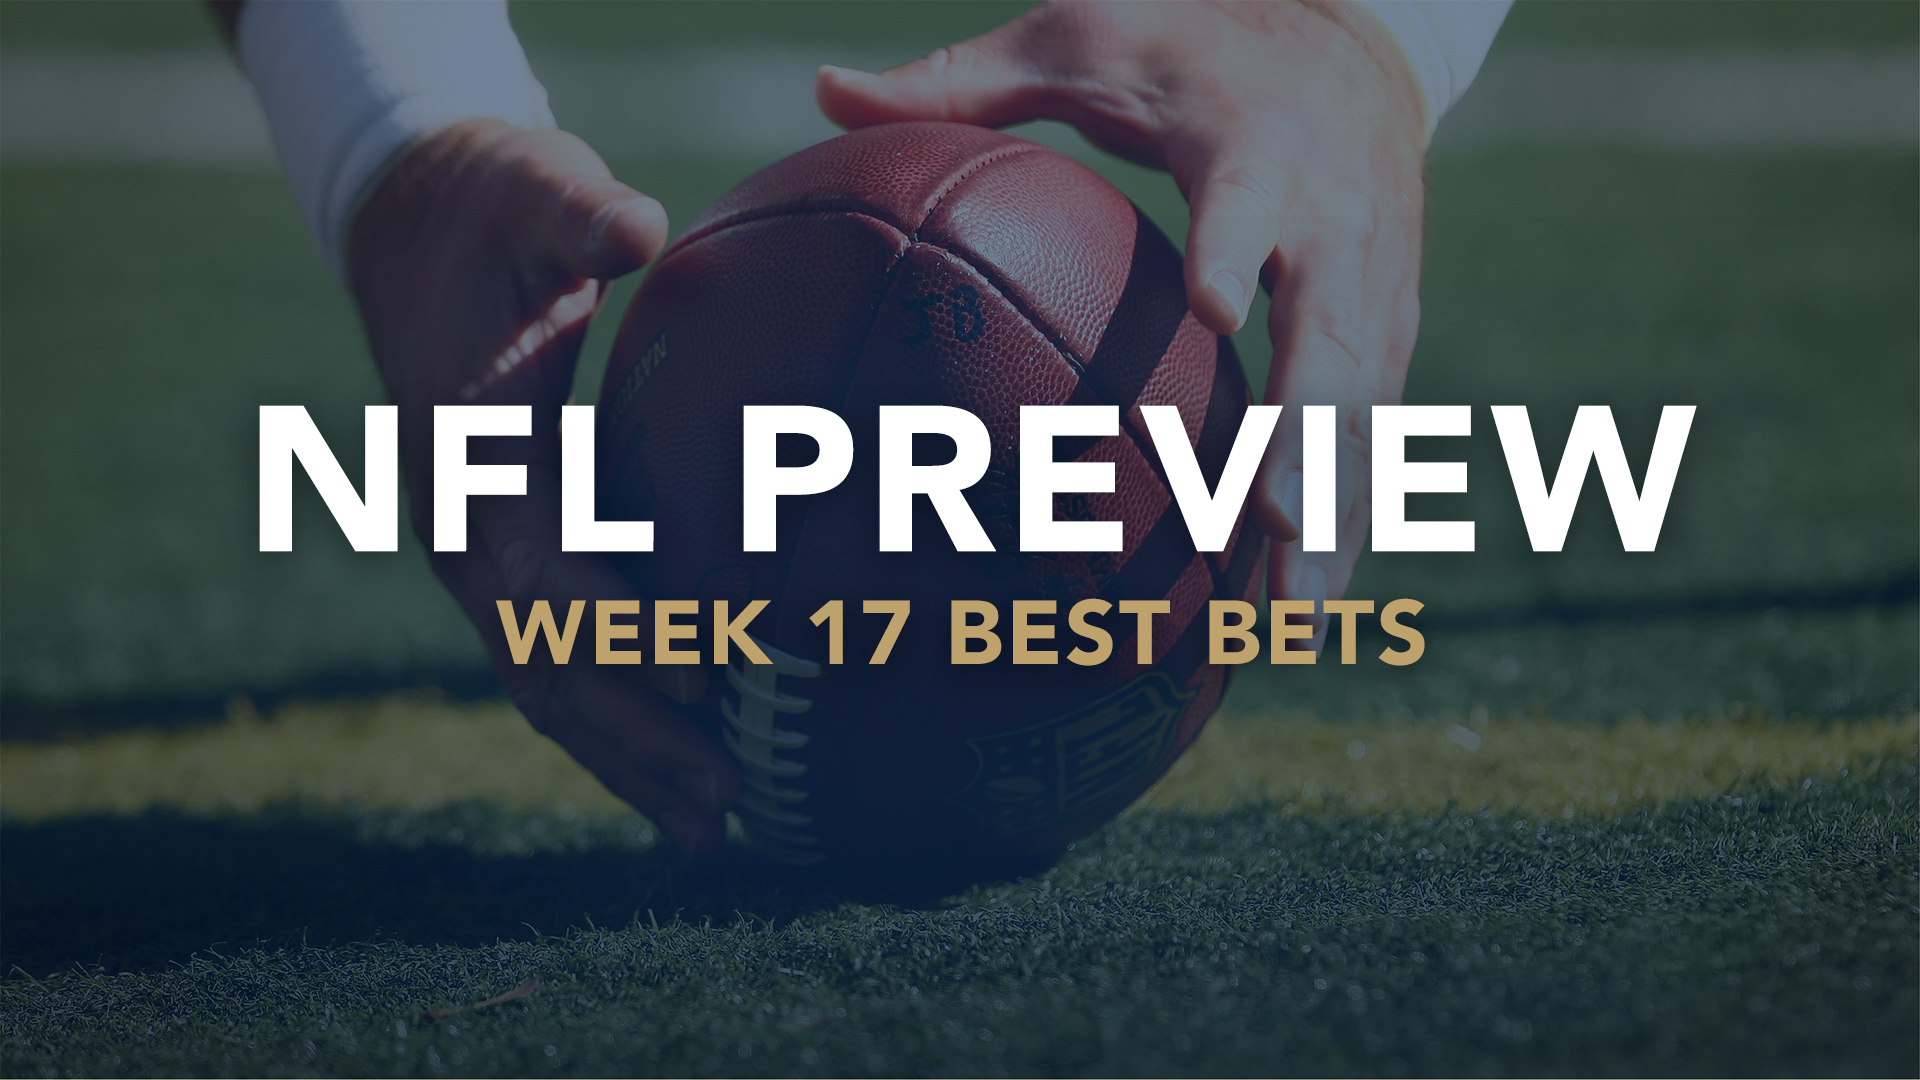 NFL betting tips: Best bets, predictions and picks for Week 17